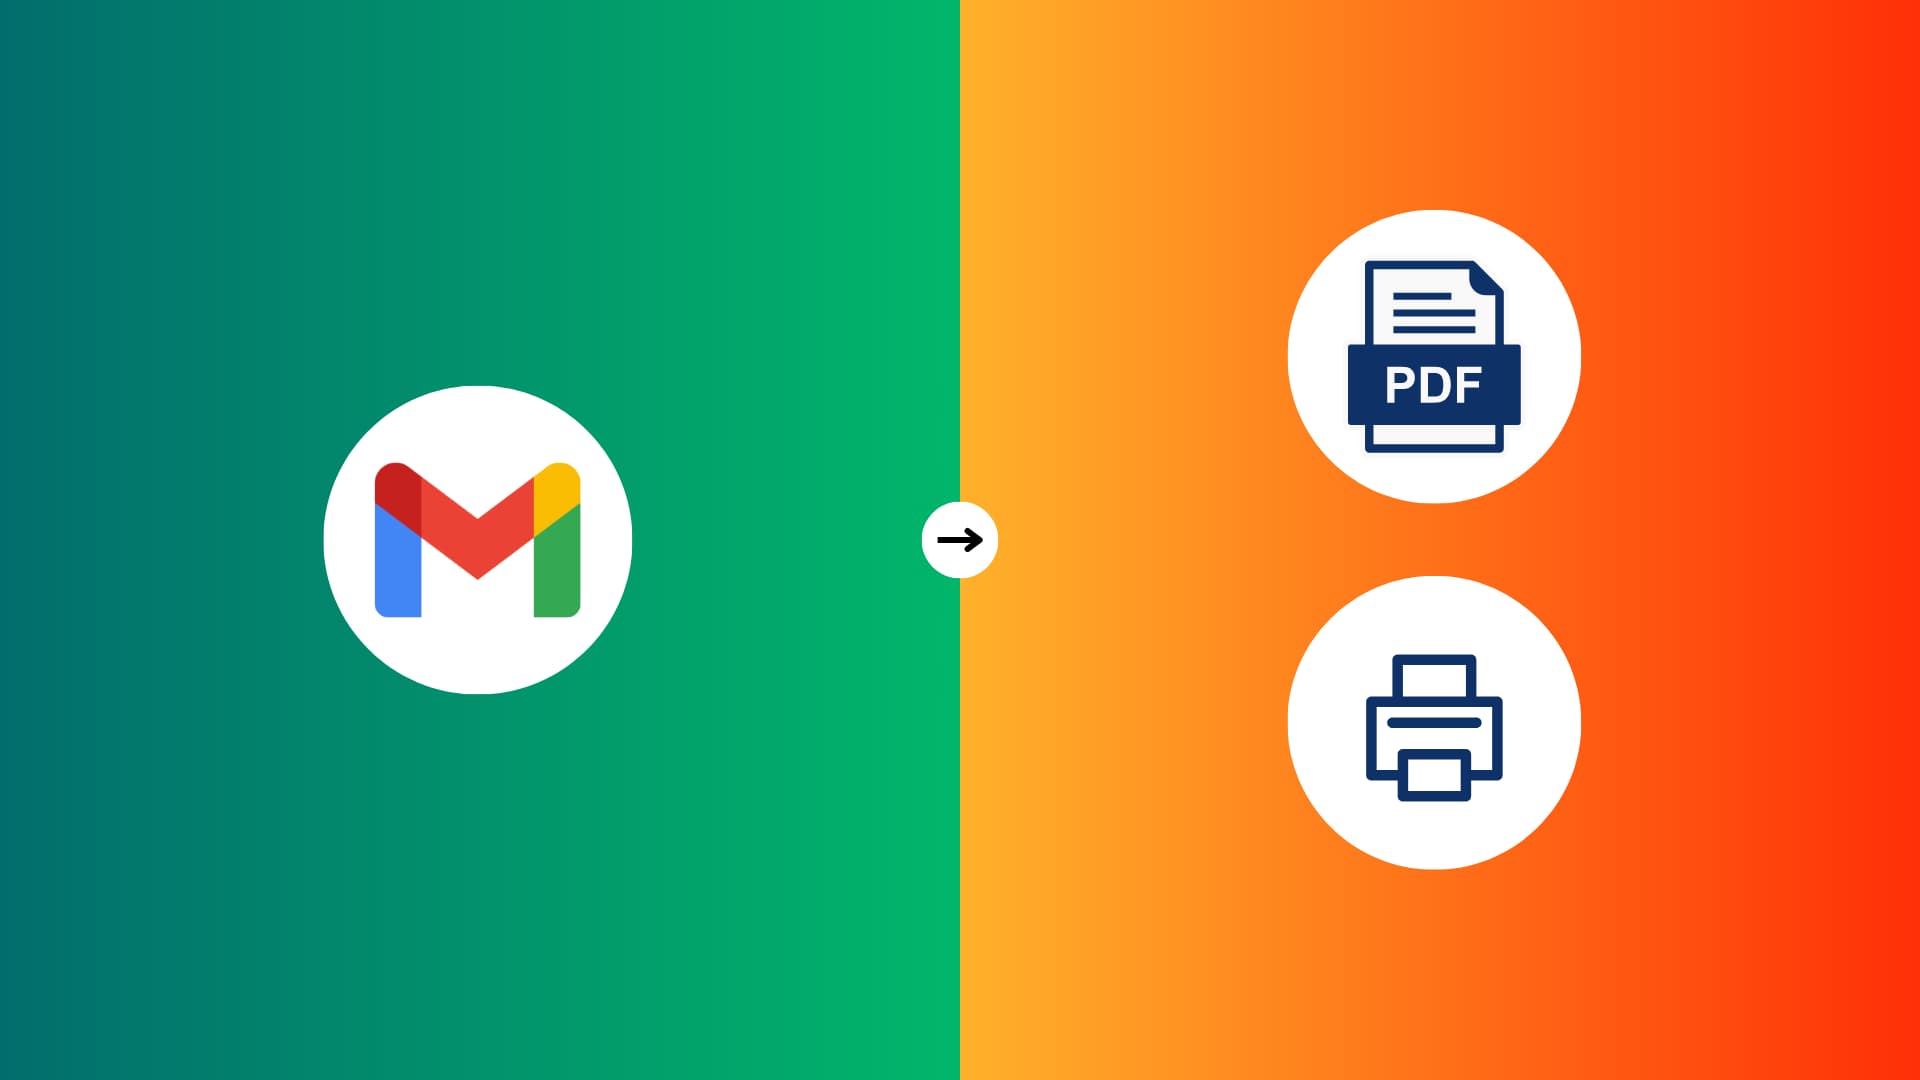 How to print or save an email from the Gmail app or website as a PDF